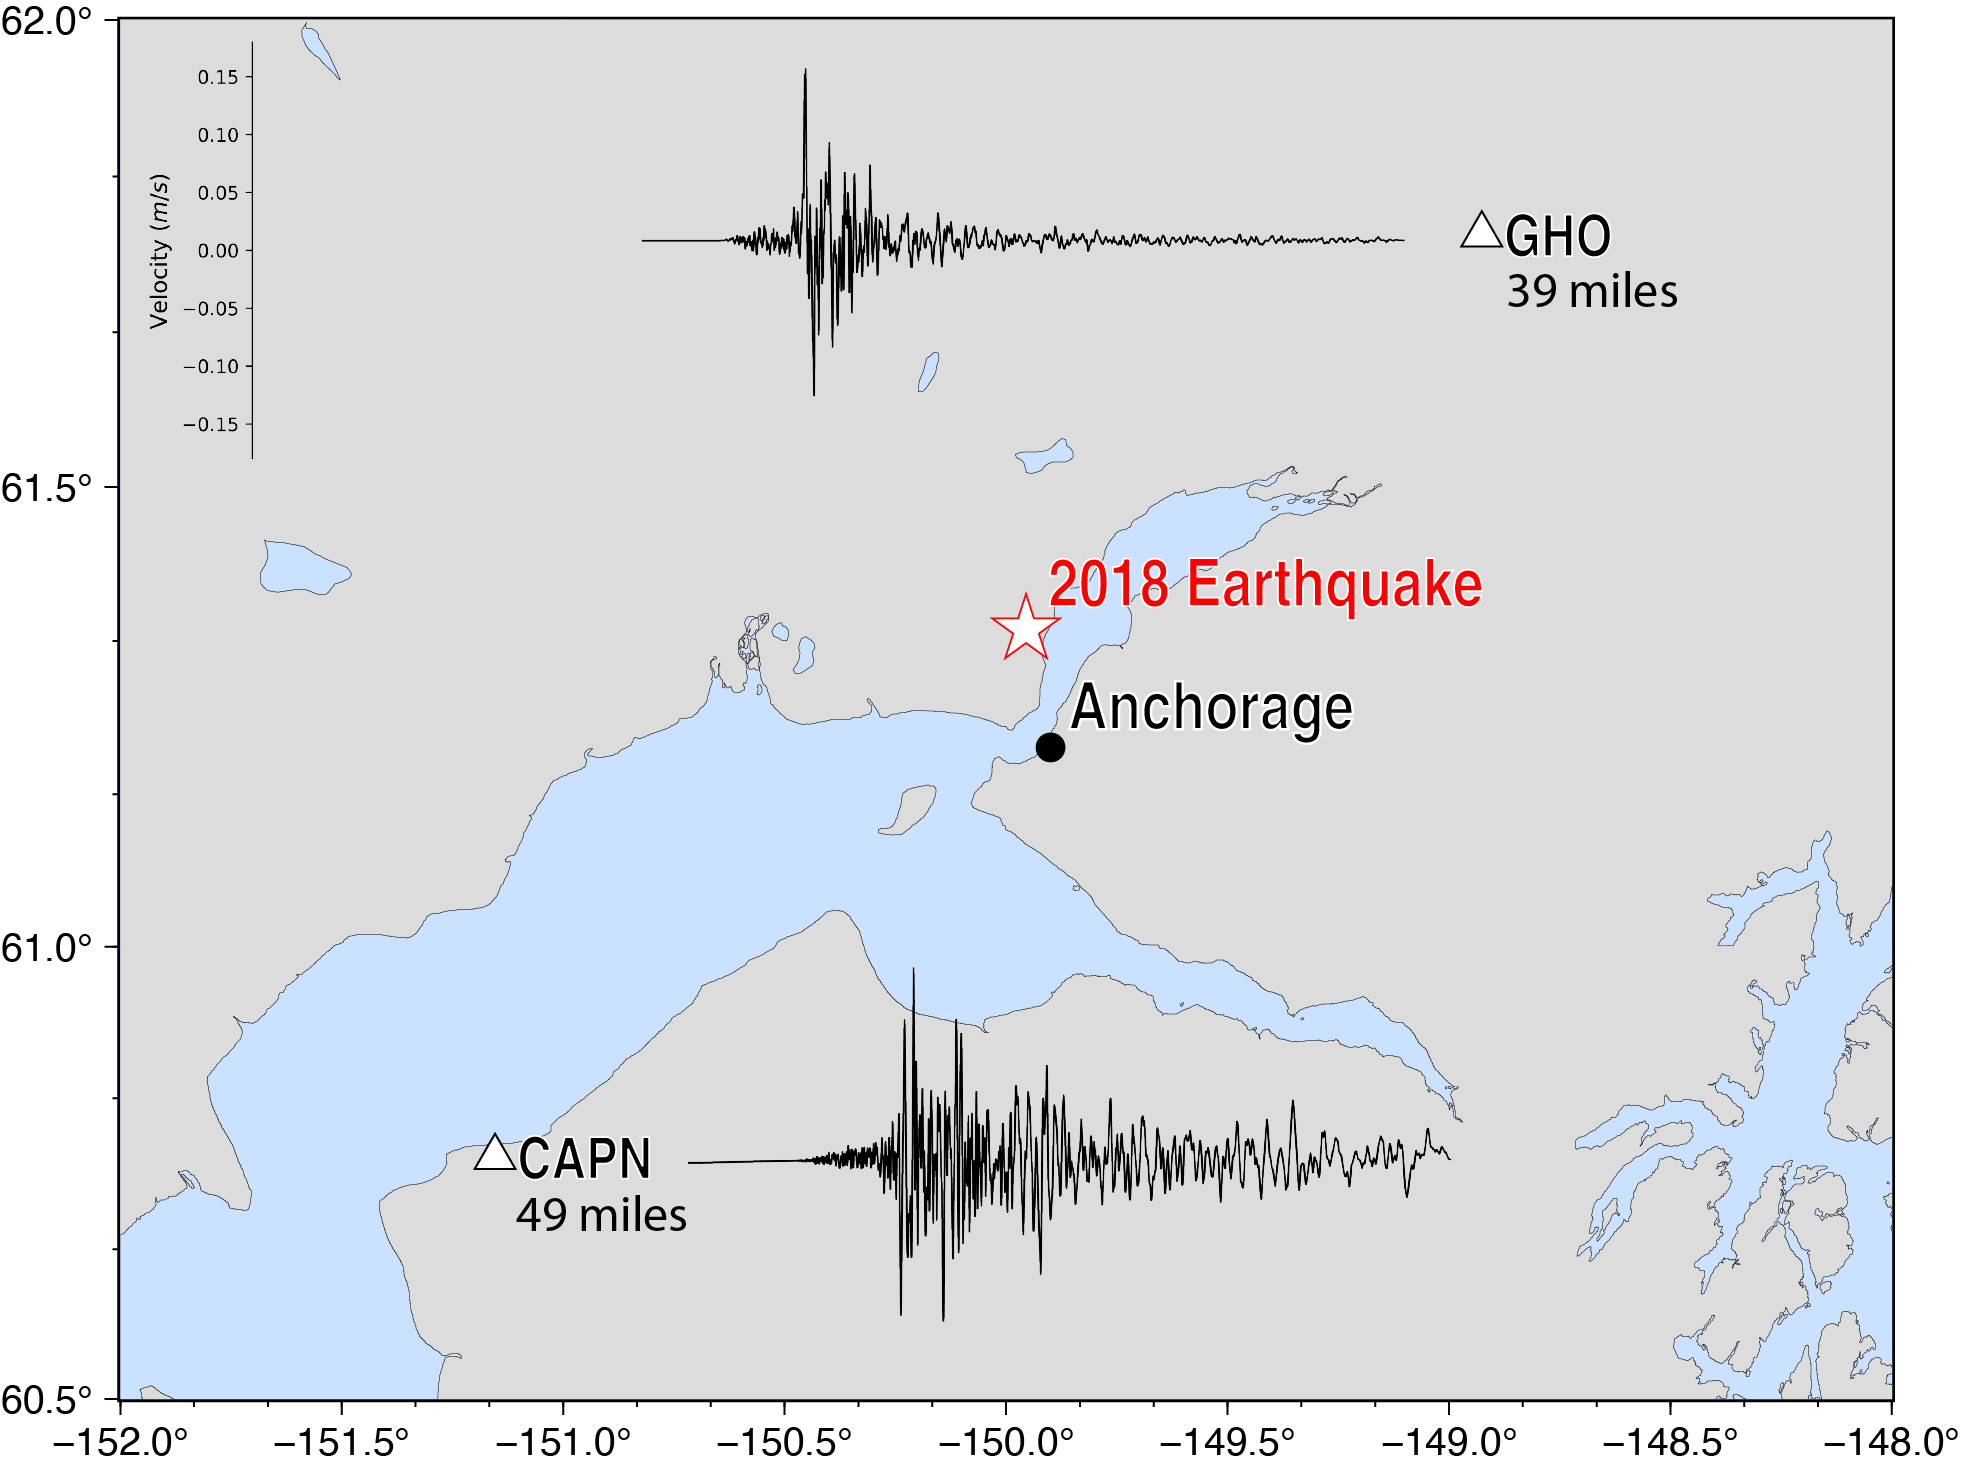 Cook Inlet Basin station shows strong shaking for 120 seconds, while the station on solid ground shows shaking for about 40 seconds.